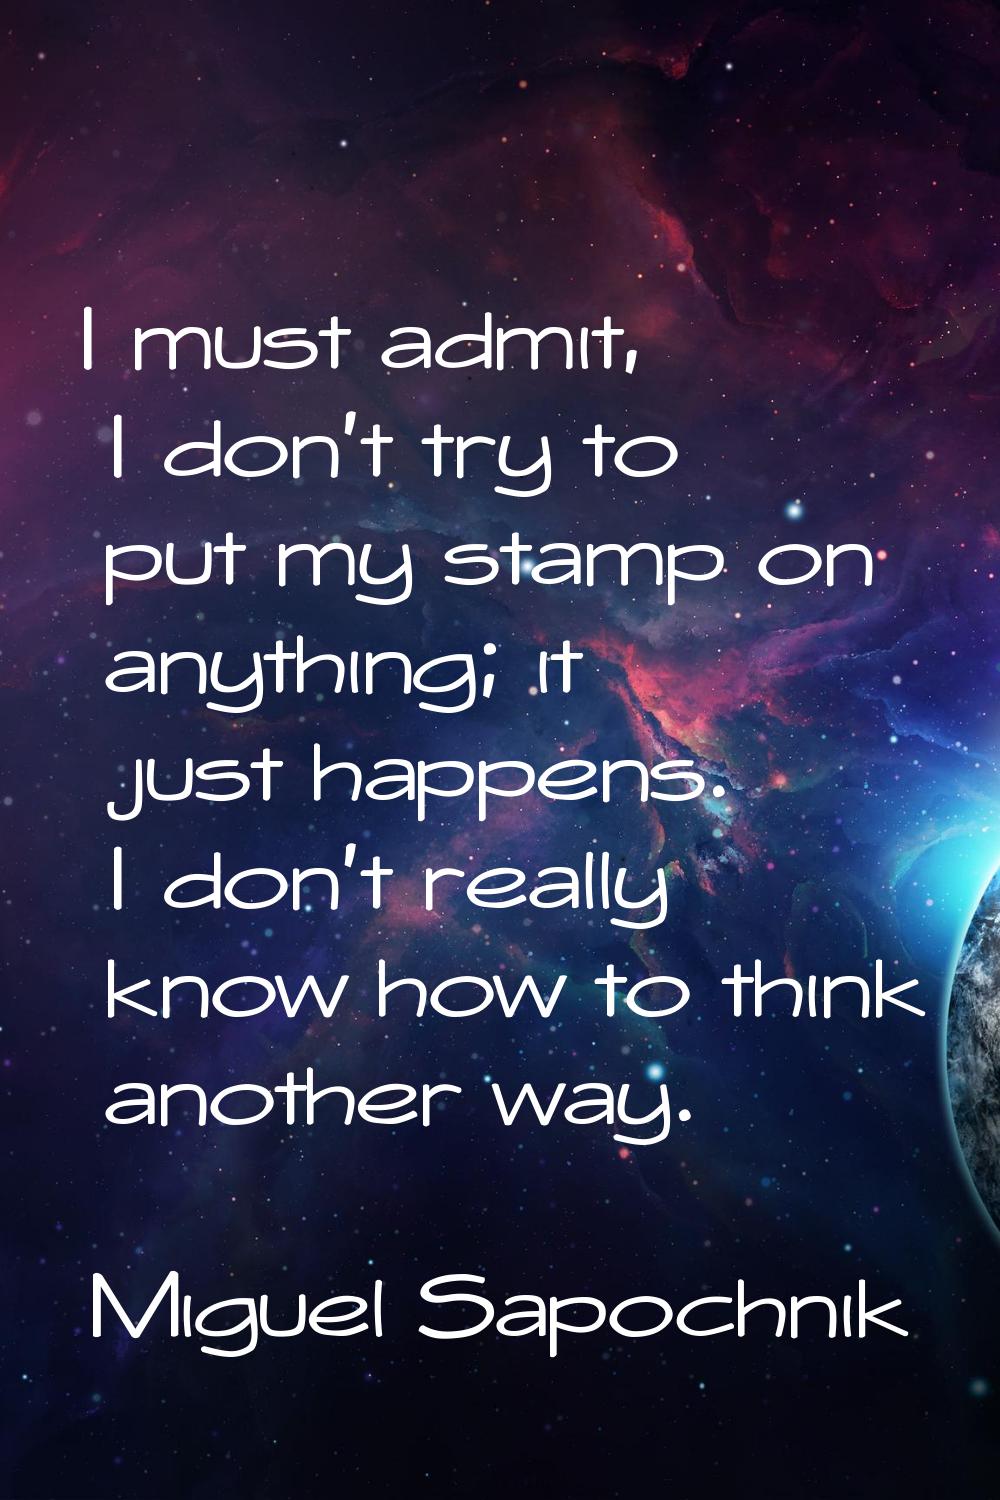 I must admit, I don't try to put my stamp on anything; it just happens. I don't really know how to 